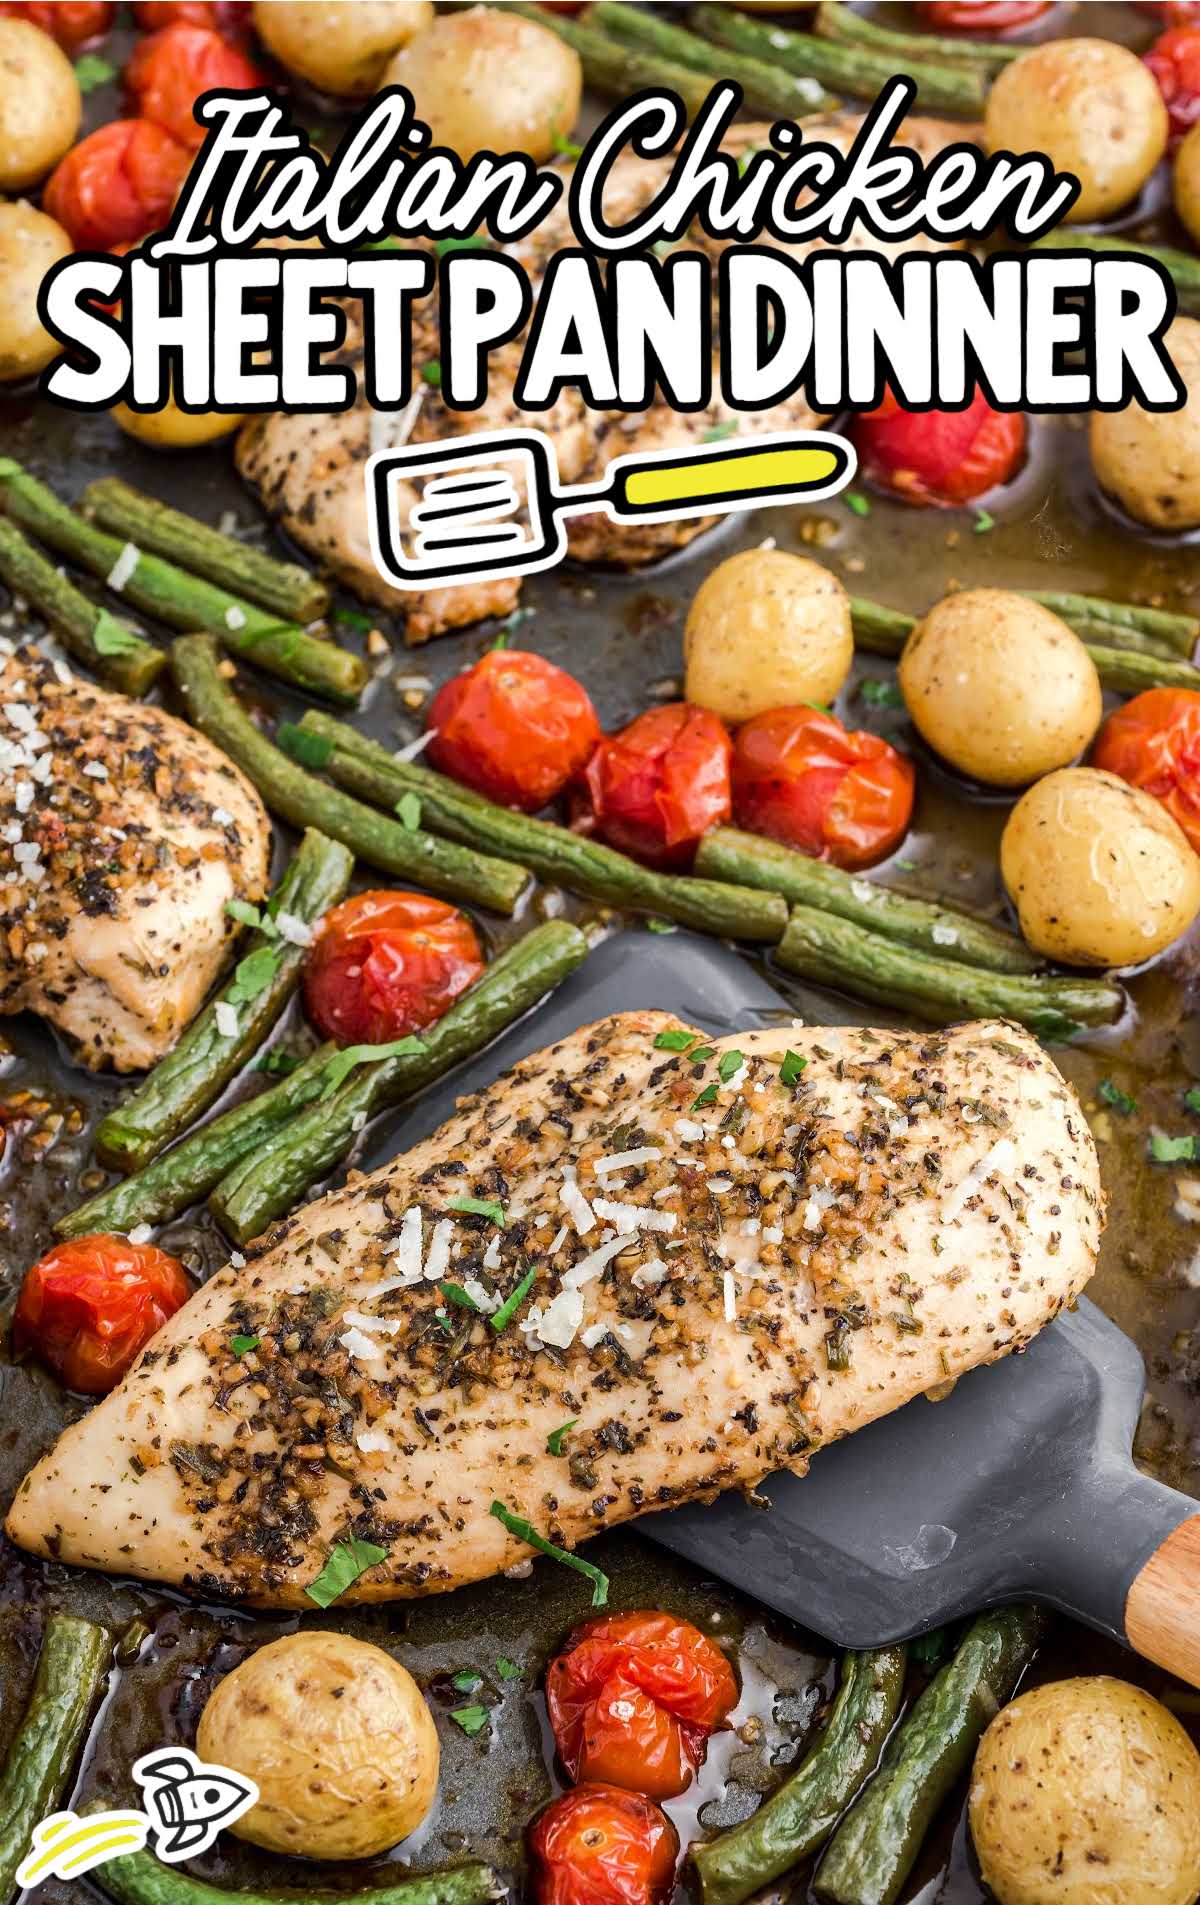 close up shot of a sheet pan full of baked chicken, potatoes, tomatoes, and green beans